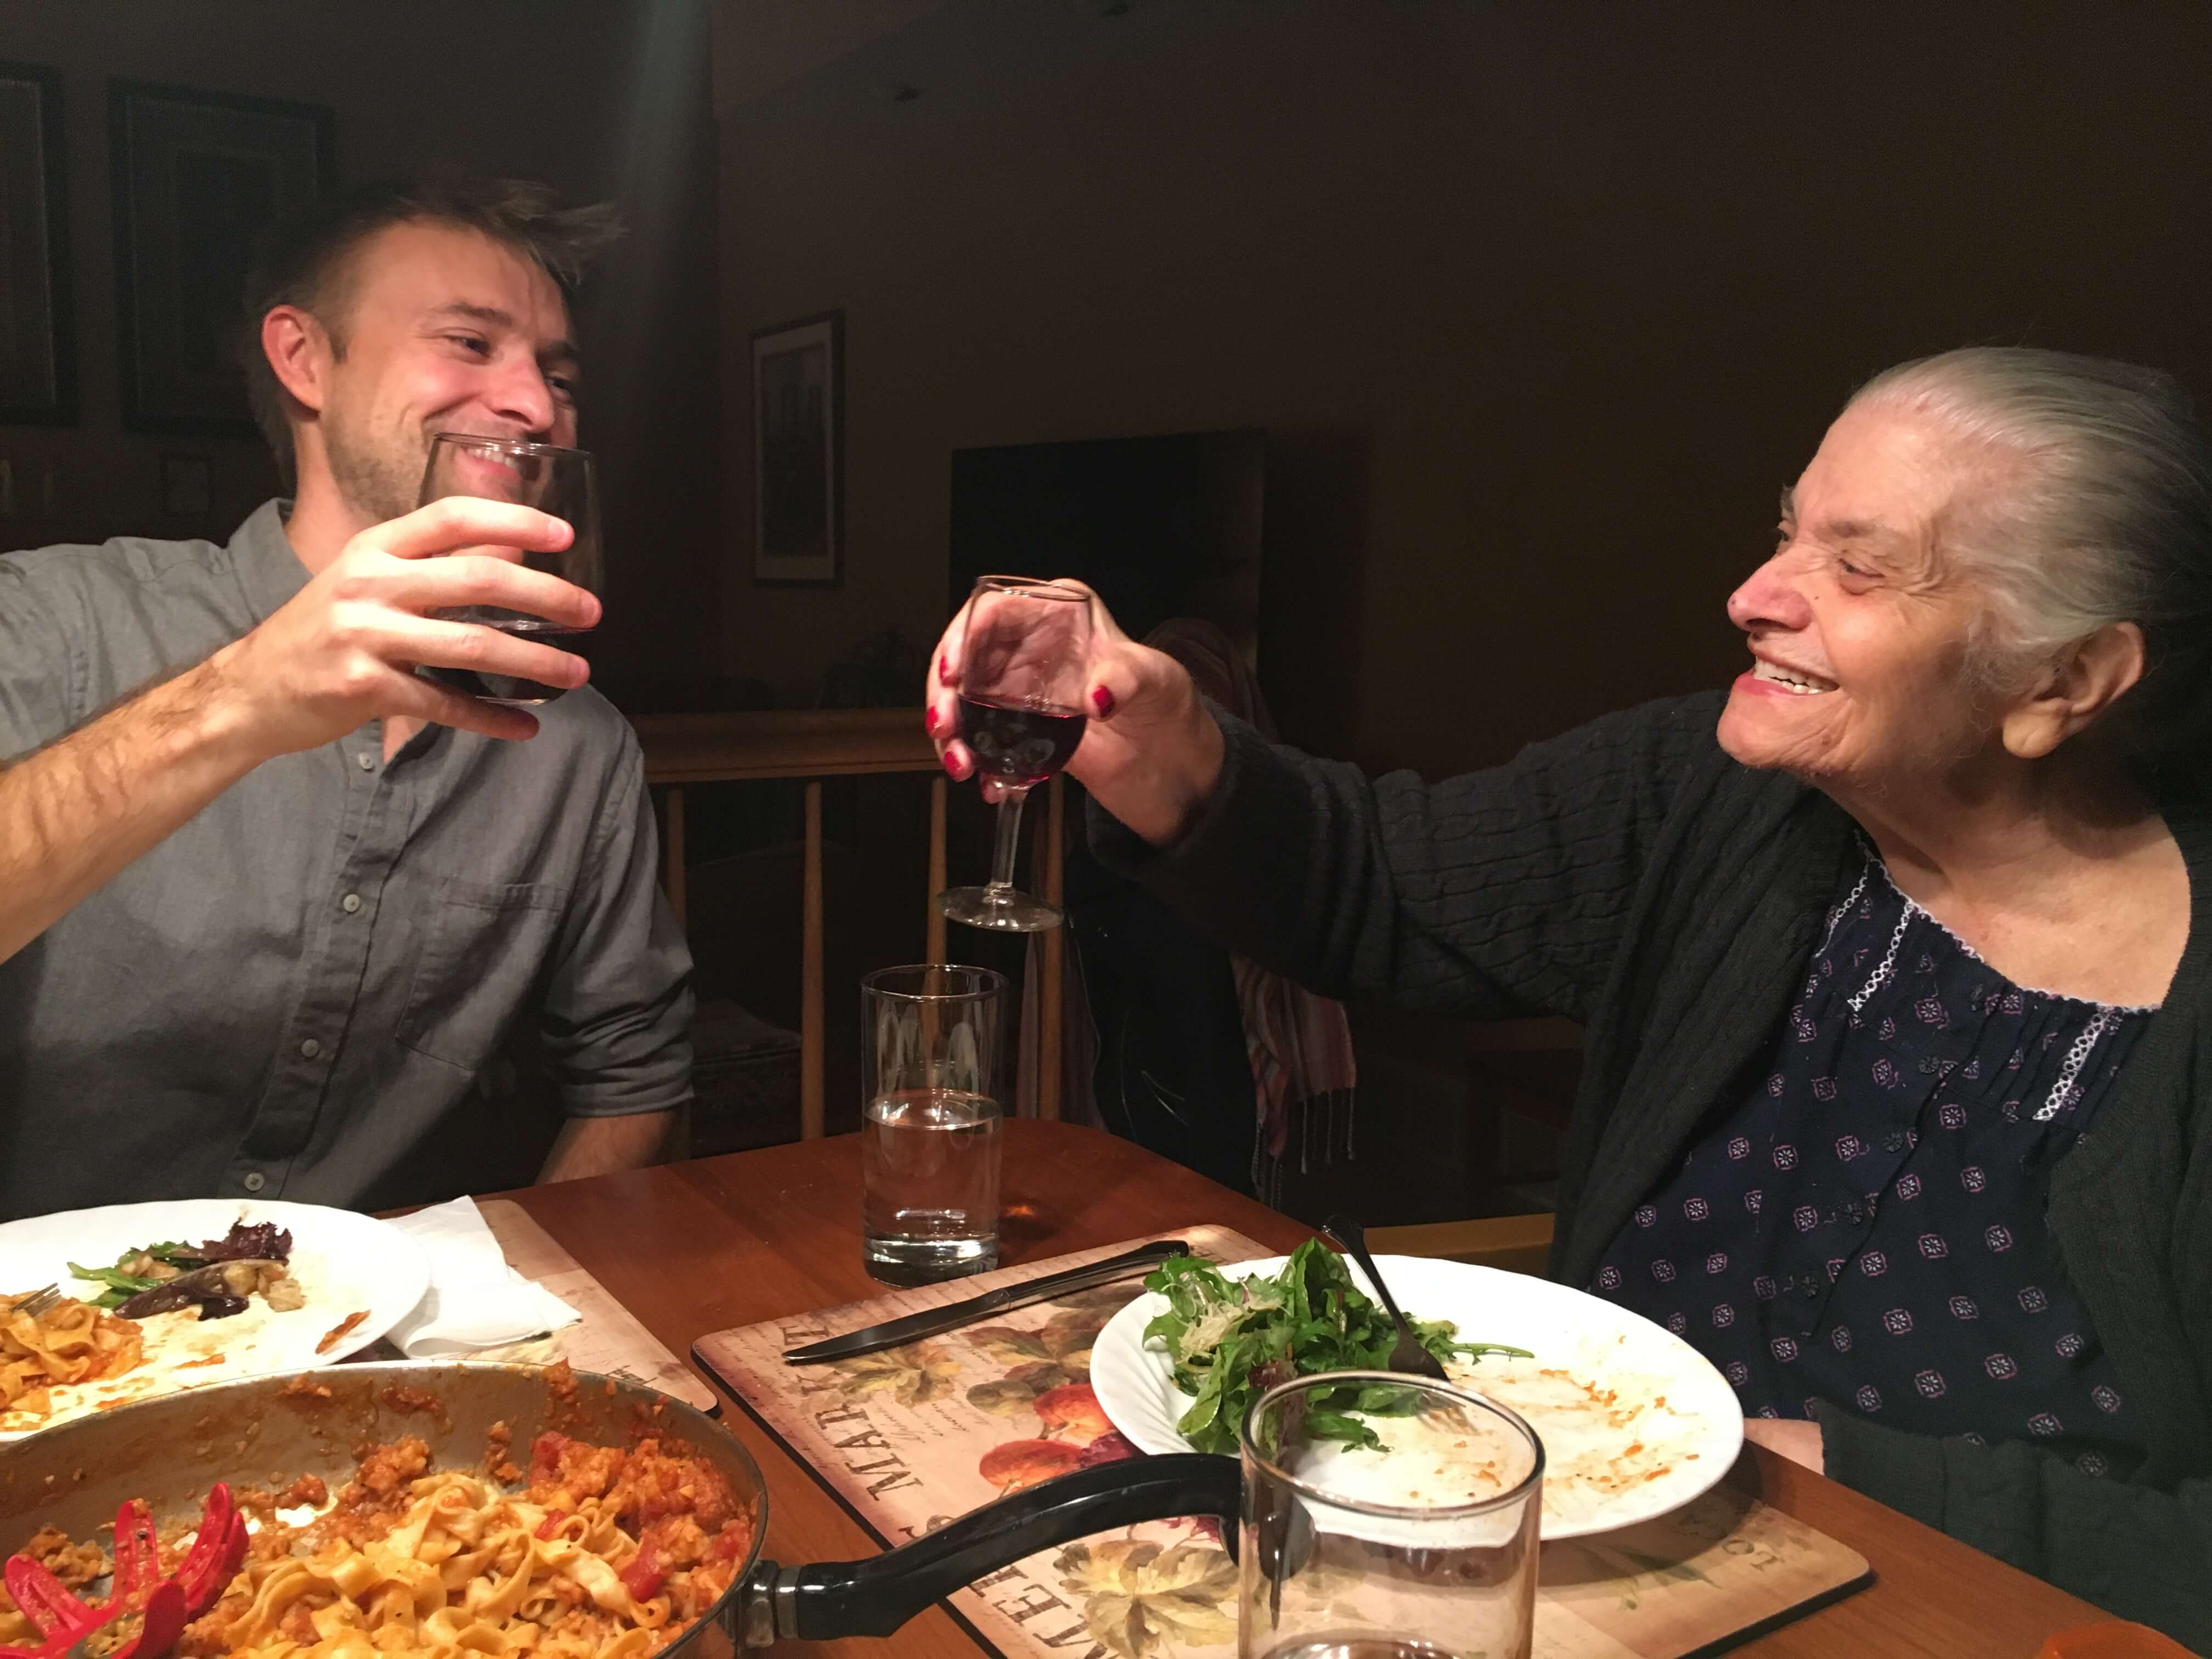 The author’s husband and grandmother, “Mama,” photographed at a family dinner in November 2018. April 2020